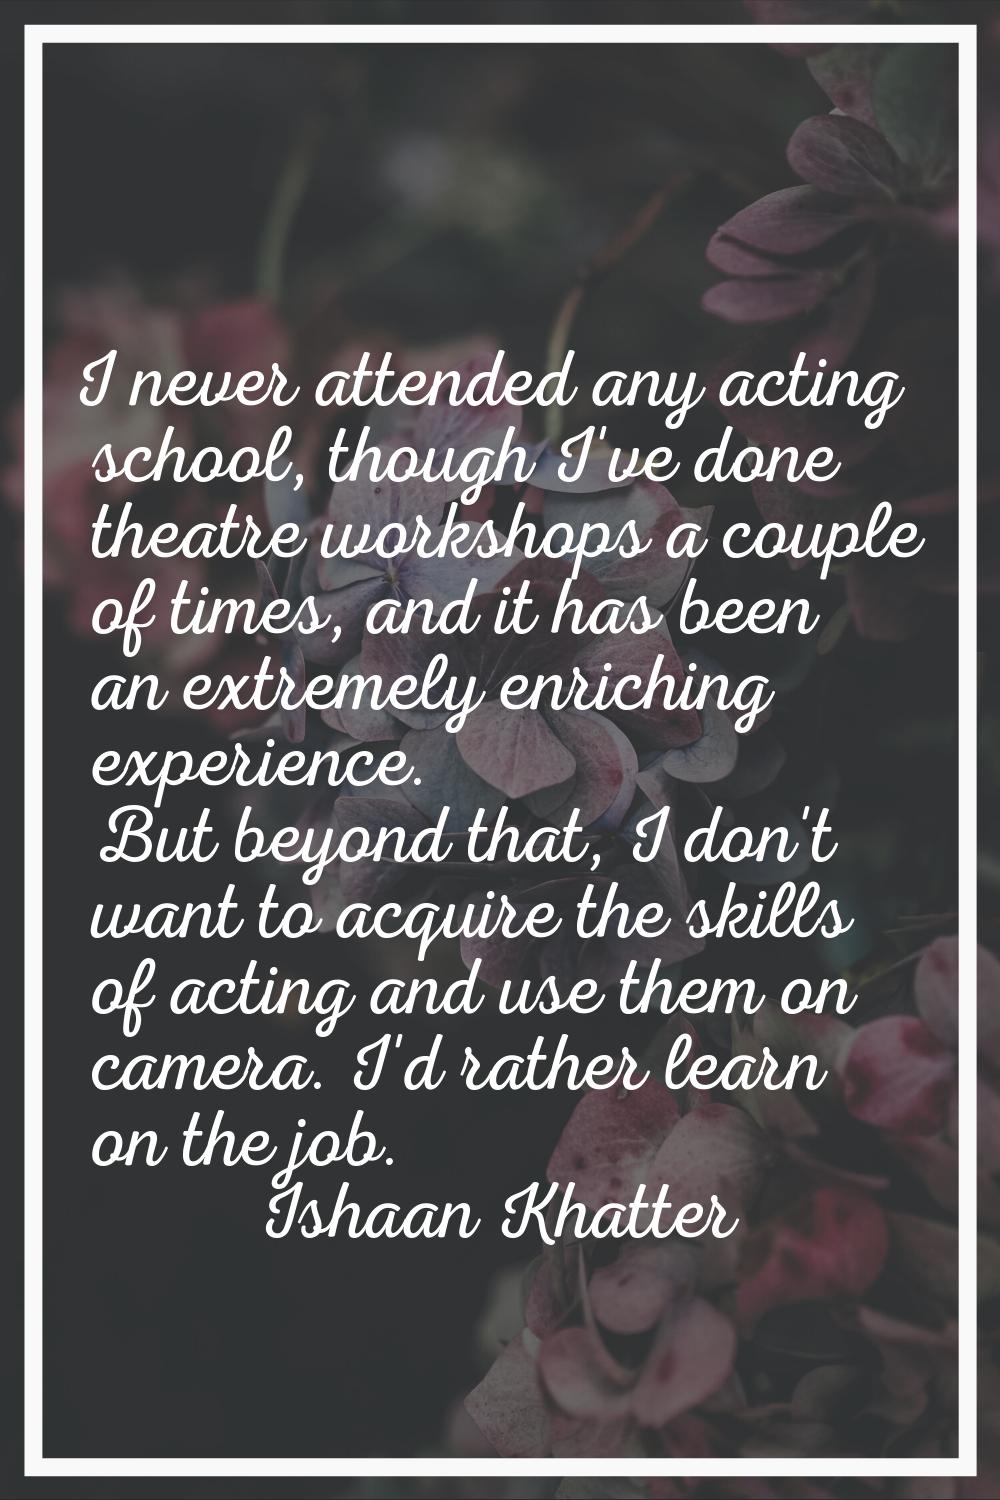 I never attended any acting school, though I've done theatre workshops a couple of times, and it ha